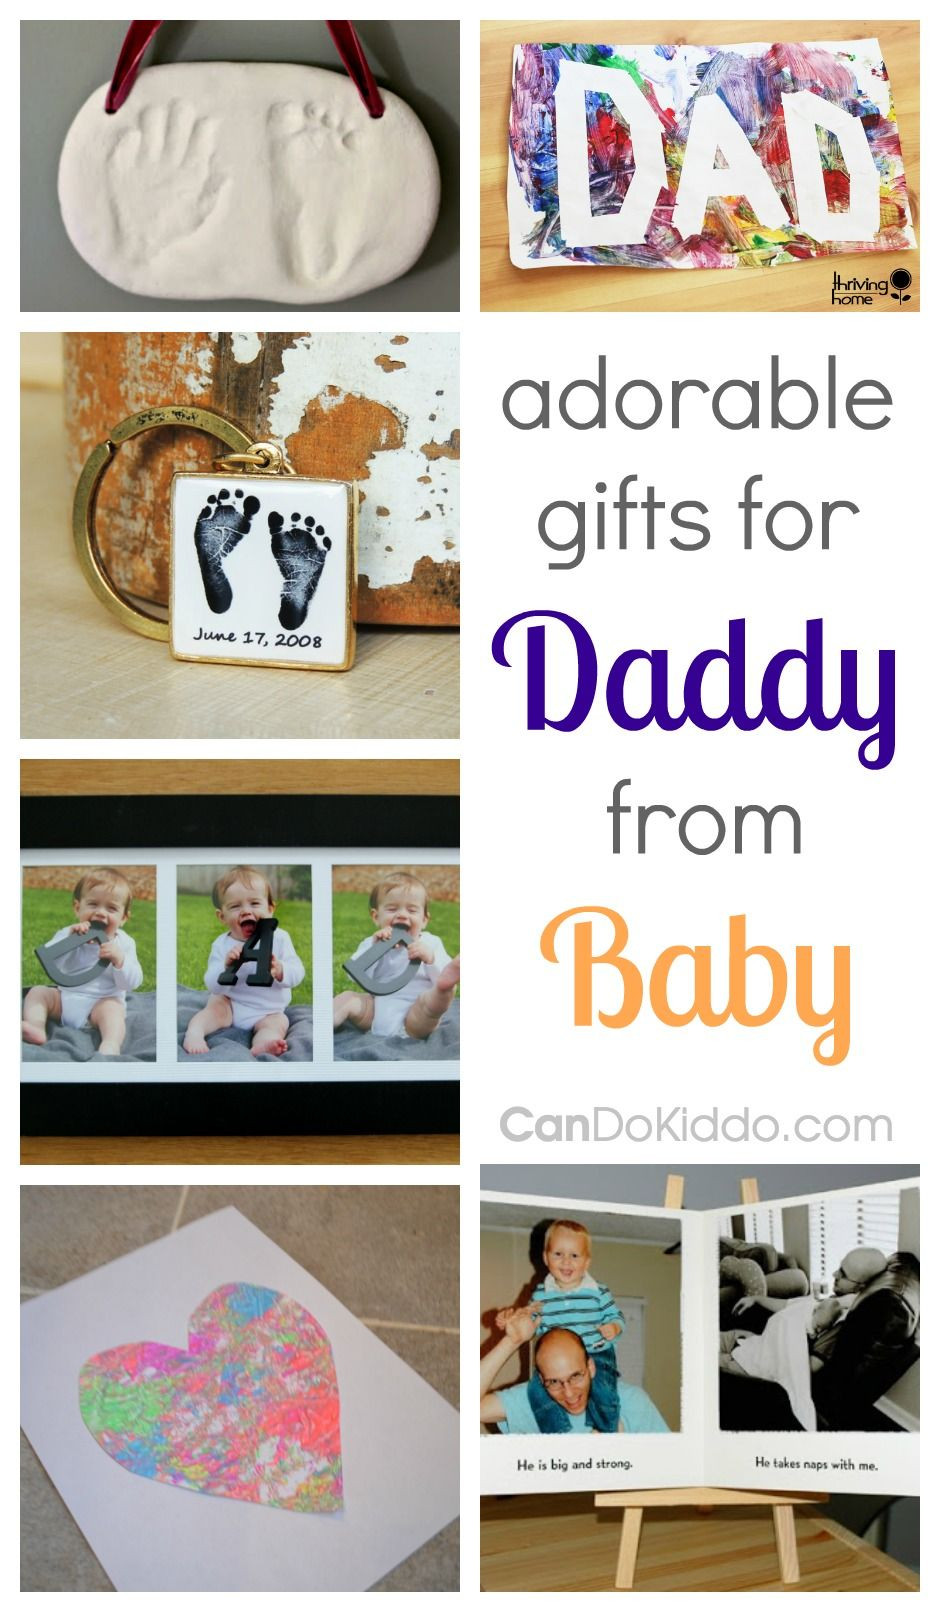 DIY Gift Ideas For Dads
 Best 25 Gifts for daddy ideas on Pinterest